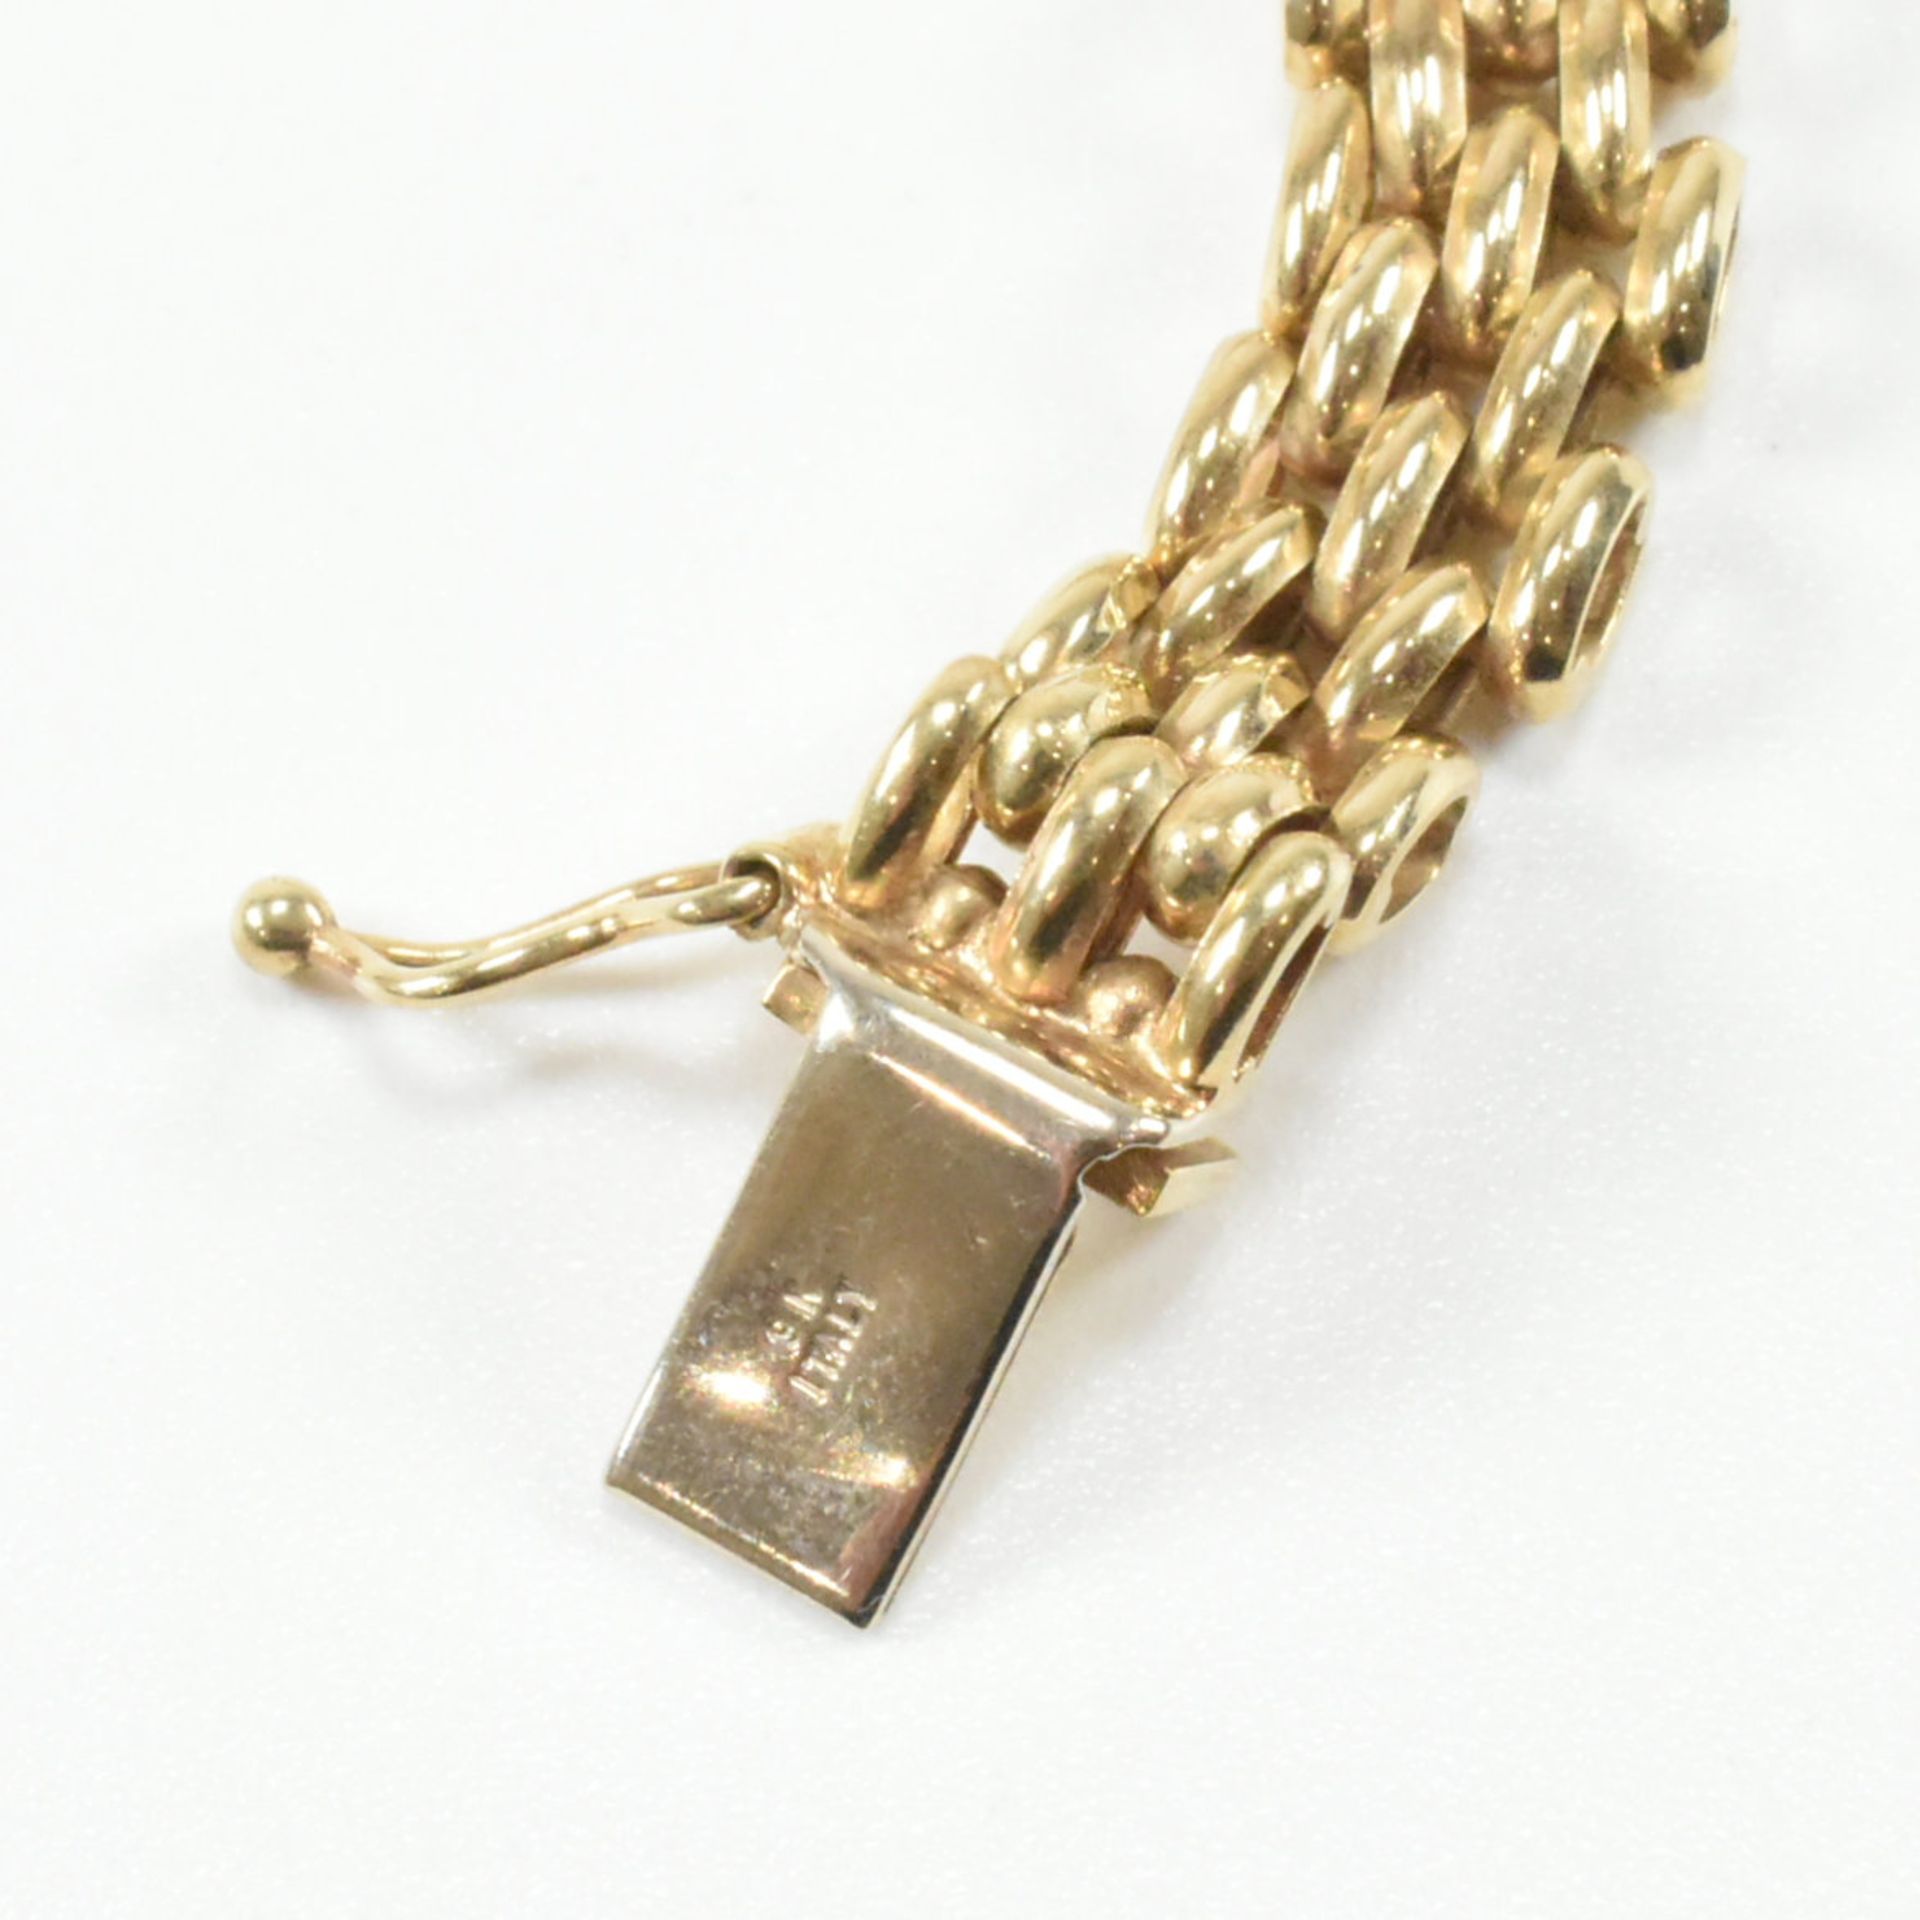 VINTAGE HALLMARKED 9CT GOLD NECKLACE CHAIN - Image 5 of 8